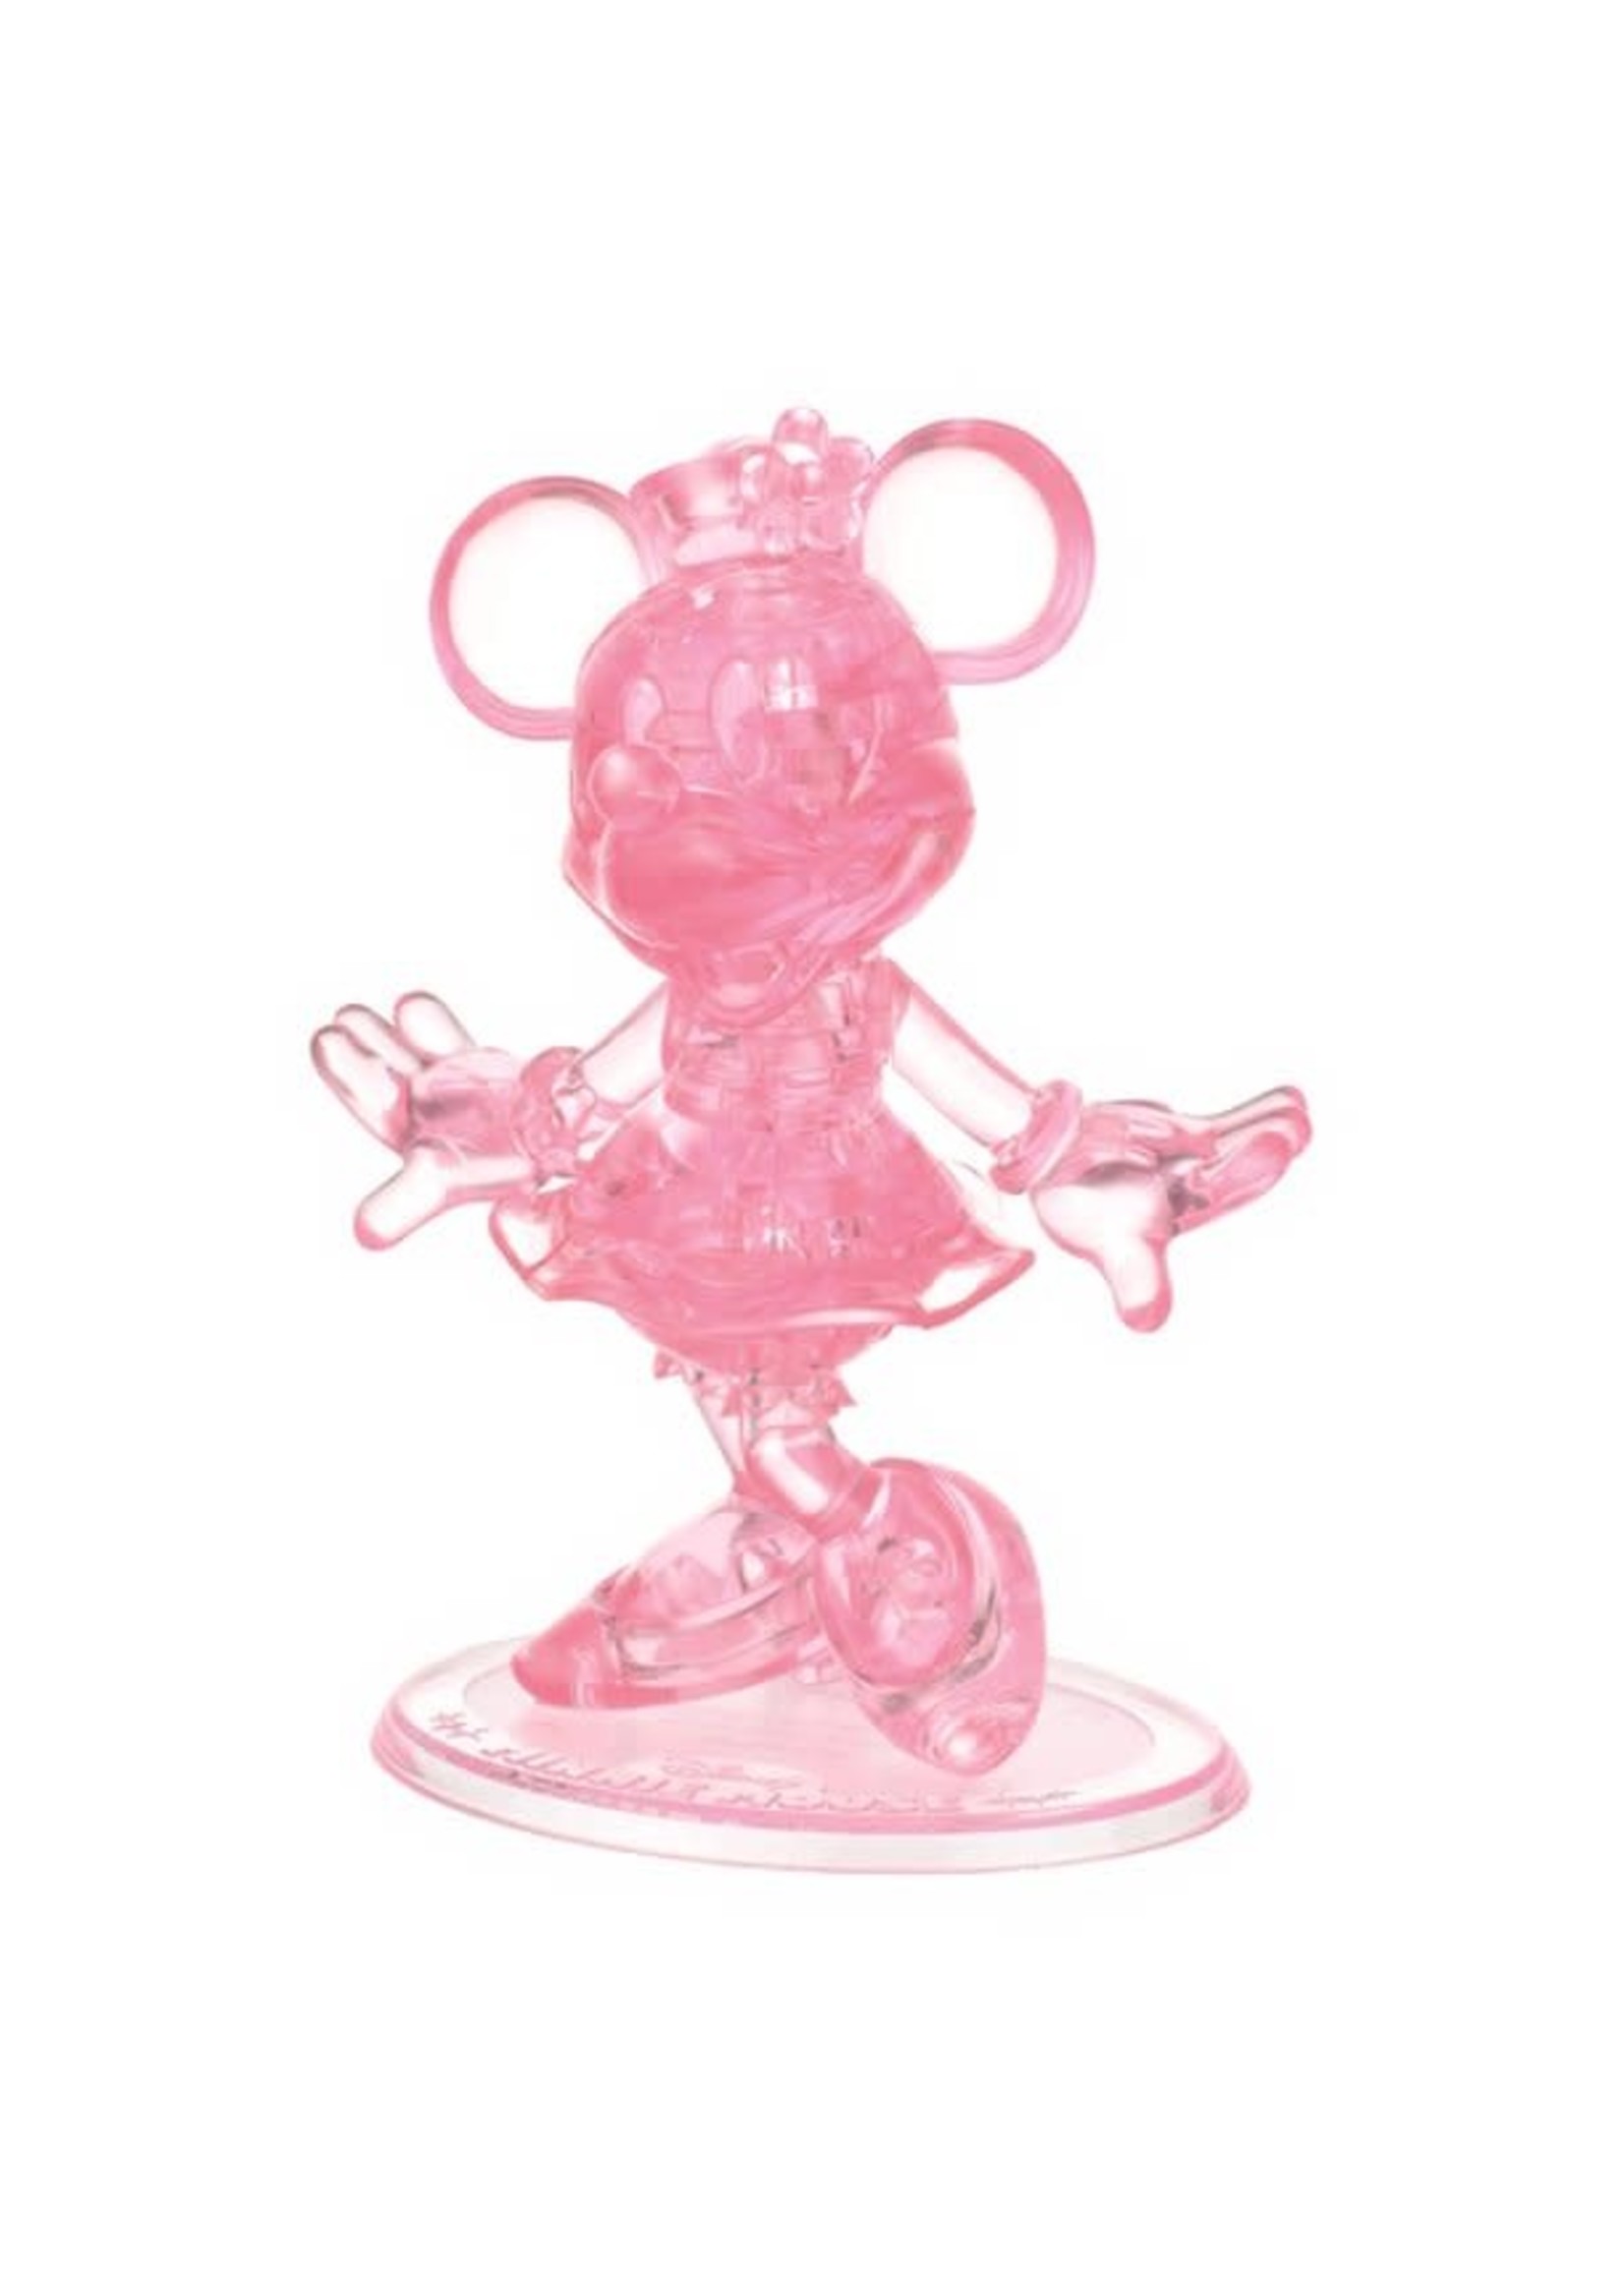 3D Crystal Pink Minnie Mouse